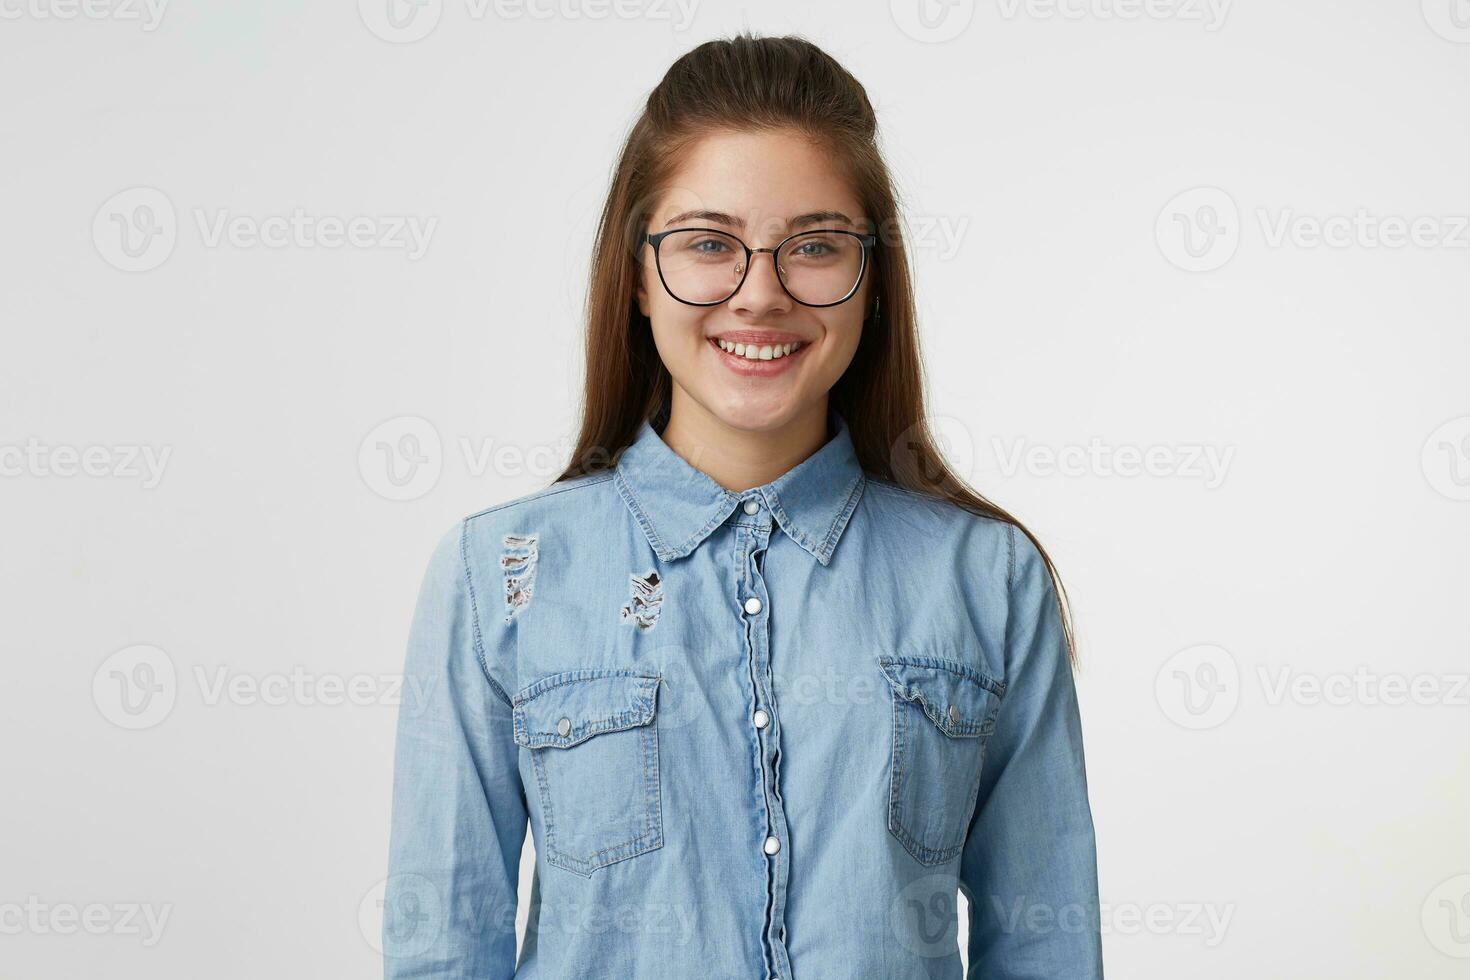 Portrait of very cute and attractive girl in glasses smiling, dressed in a fashionable denim shirt, isolated on a white background photo